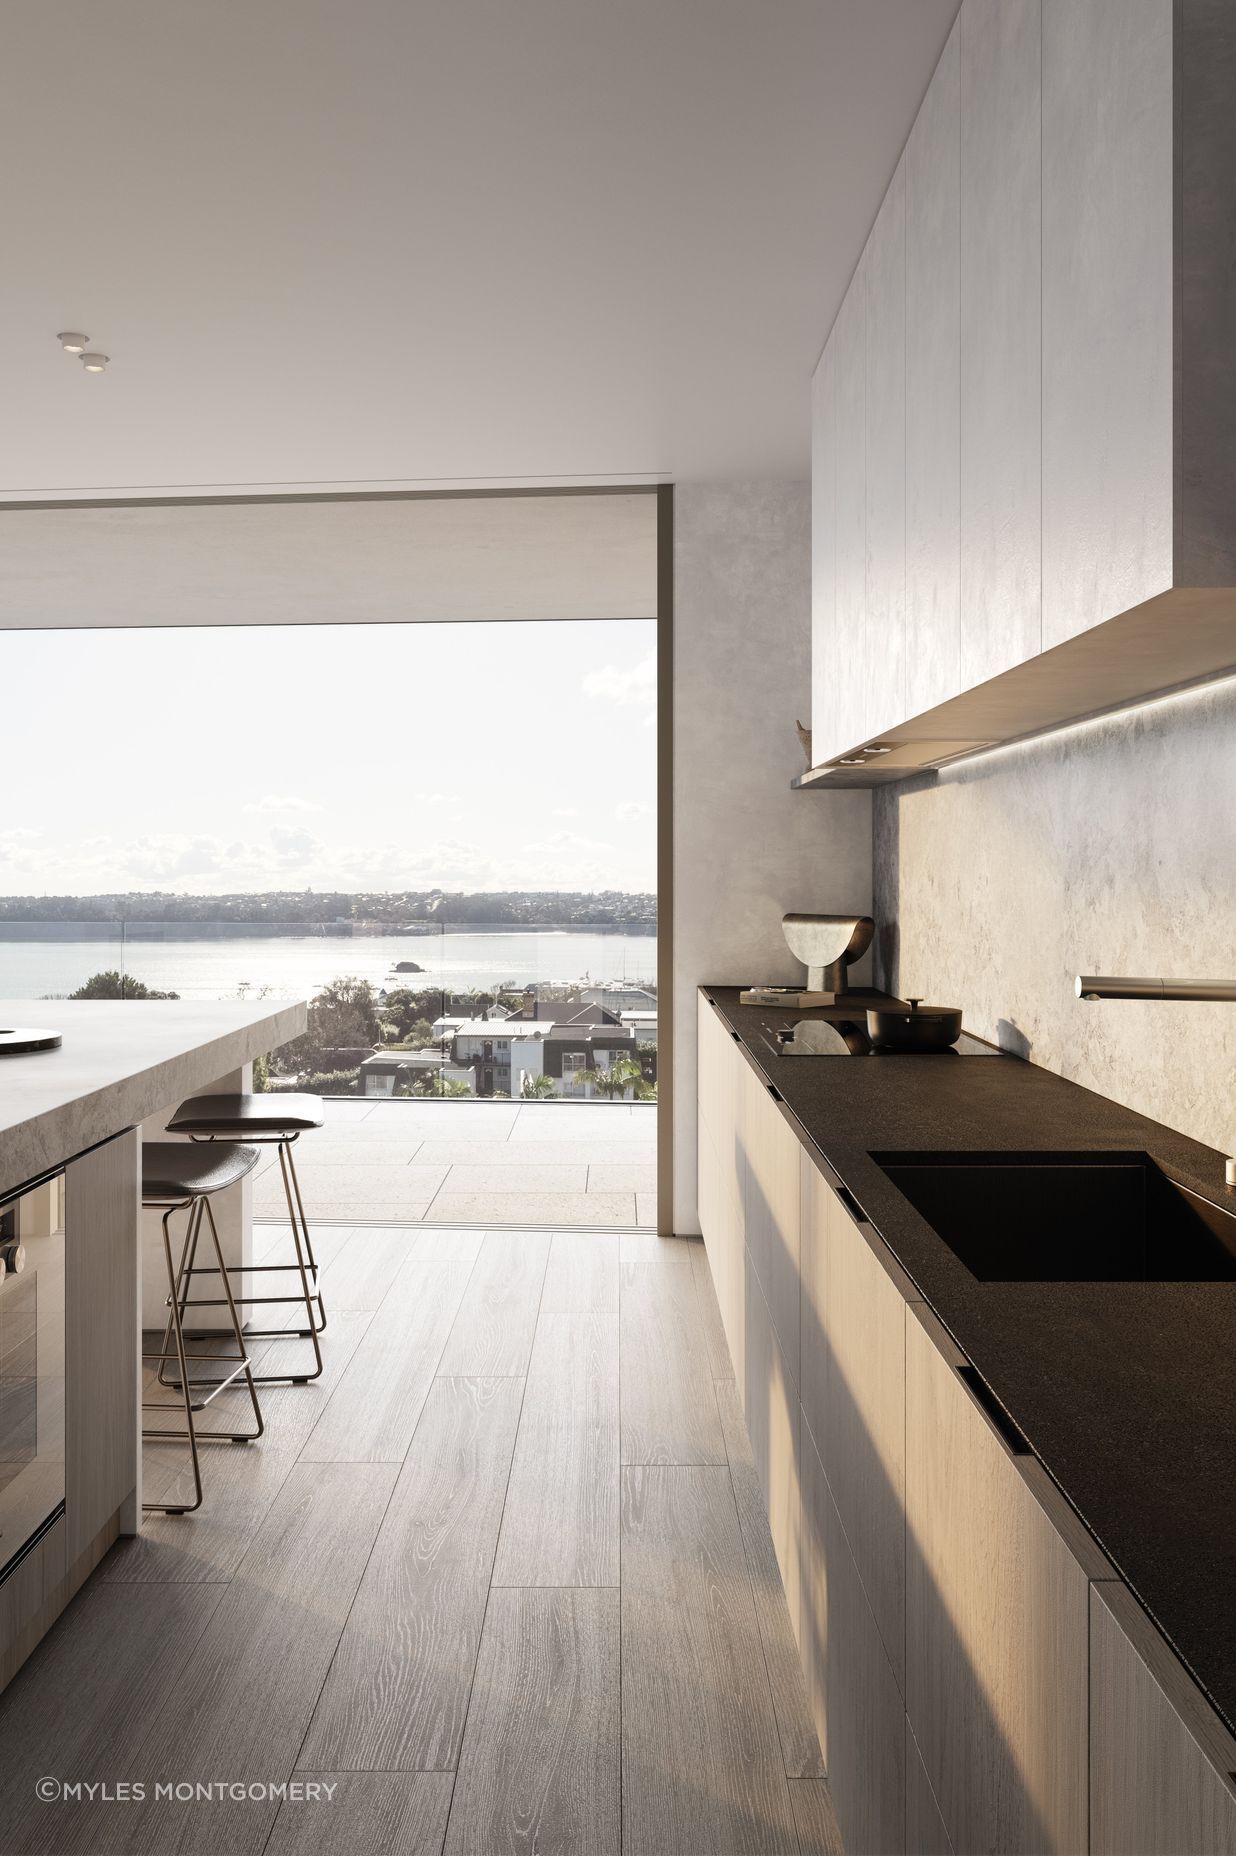 Kitchens are designed with custom-made cabinetry, state-of-the-art Gaggenau and Liebherr appliances, a honed marble island, and honed slate benchtops.